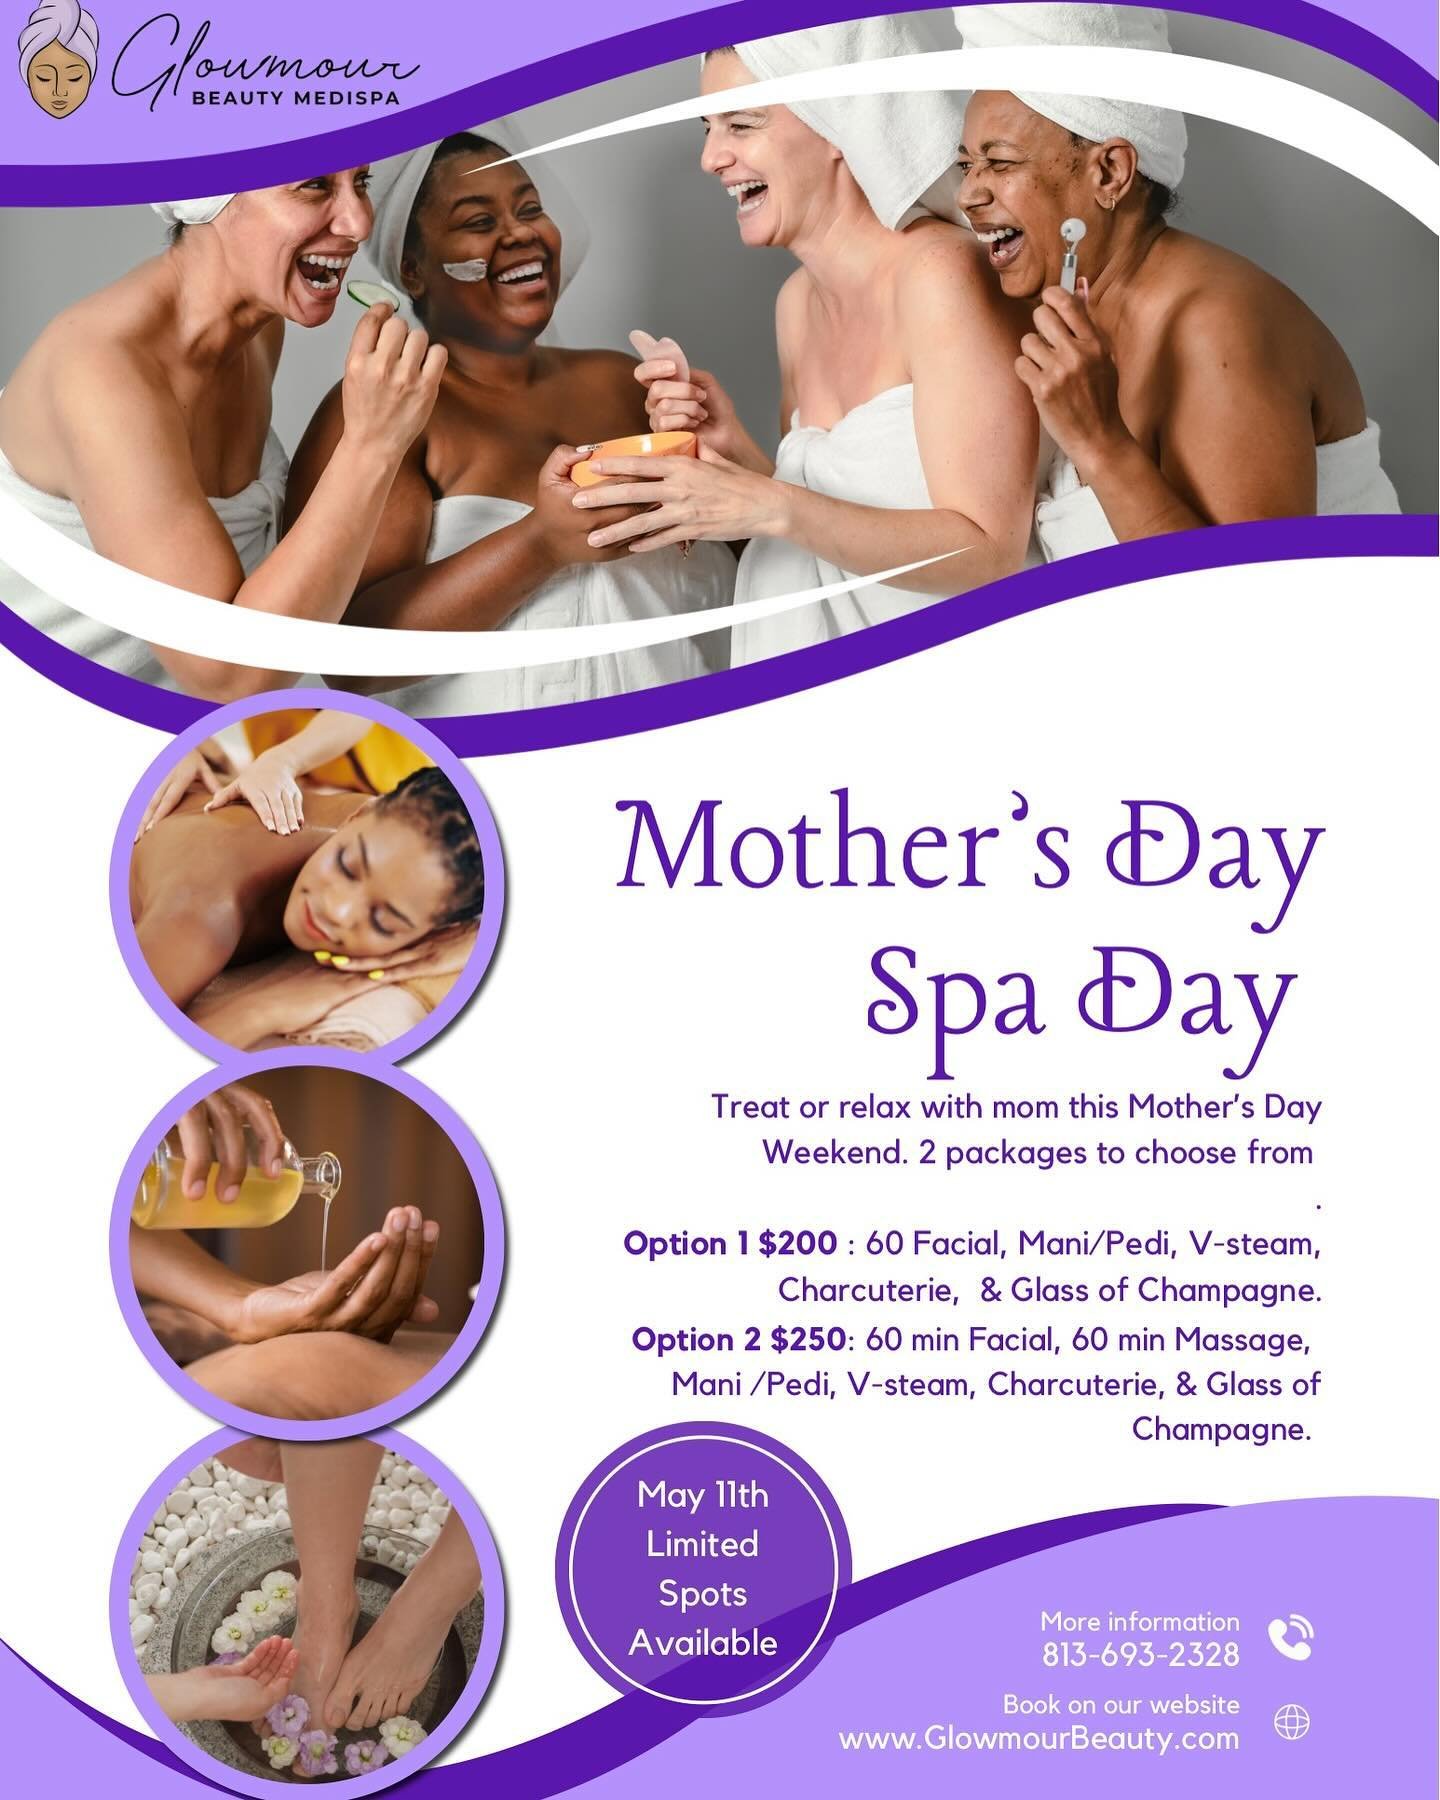 Indulge in an opulent Mother&rsquo;s Day Weekend retreat with us, dear mothers! The spa awaits your presence exclusively, where you&rsquo;ll be lavished with two luxurious restorative experiences. 

Delight in the calming v-steam, pamper your hands a